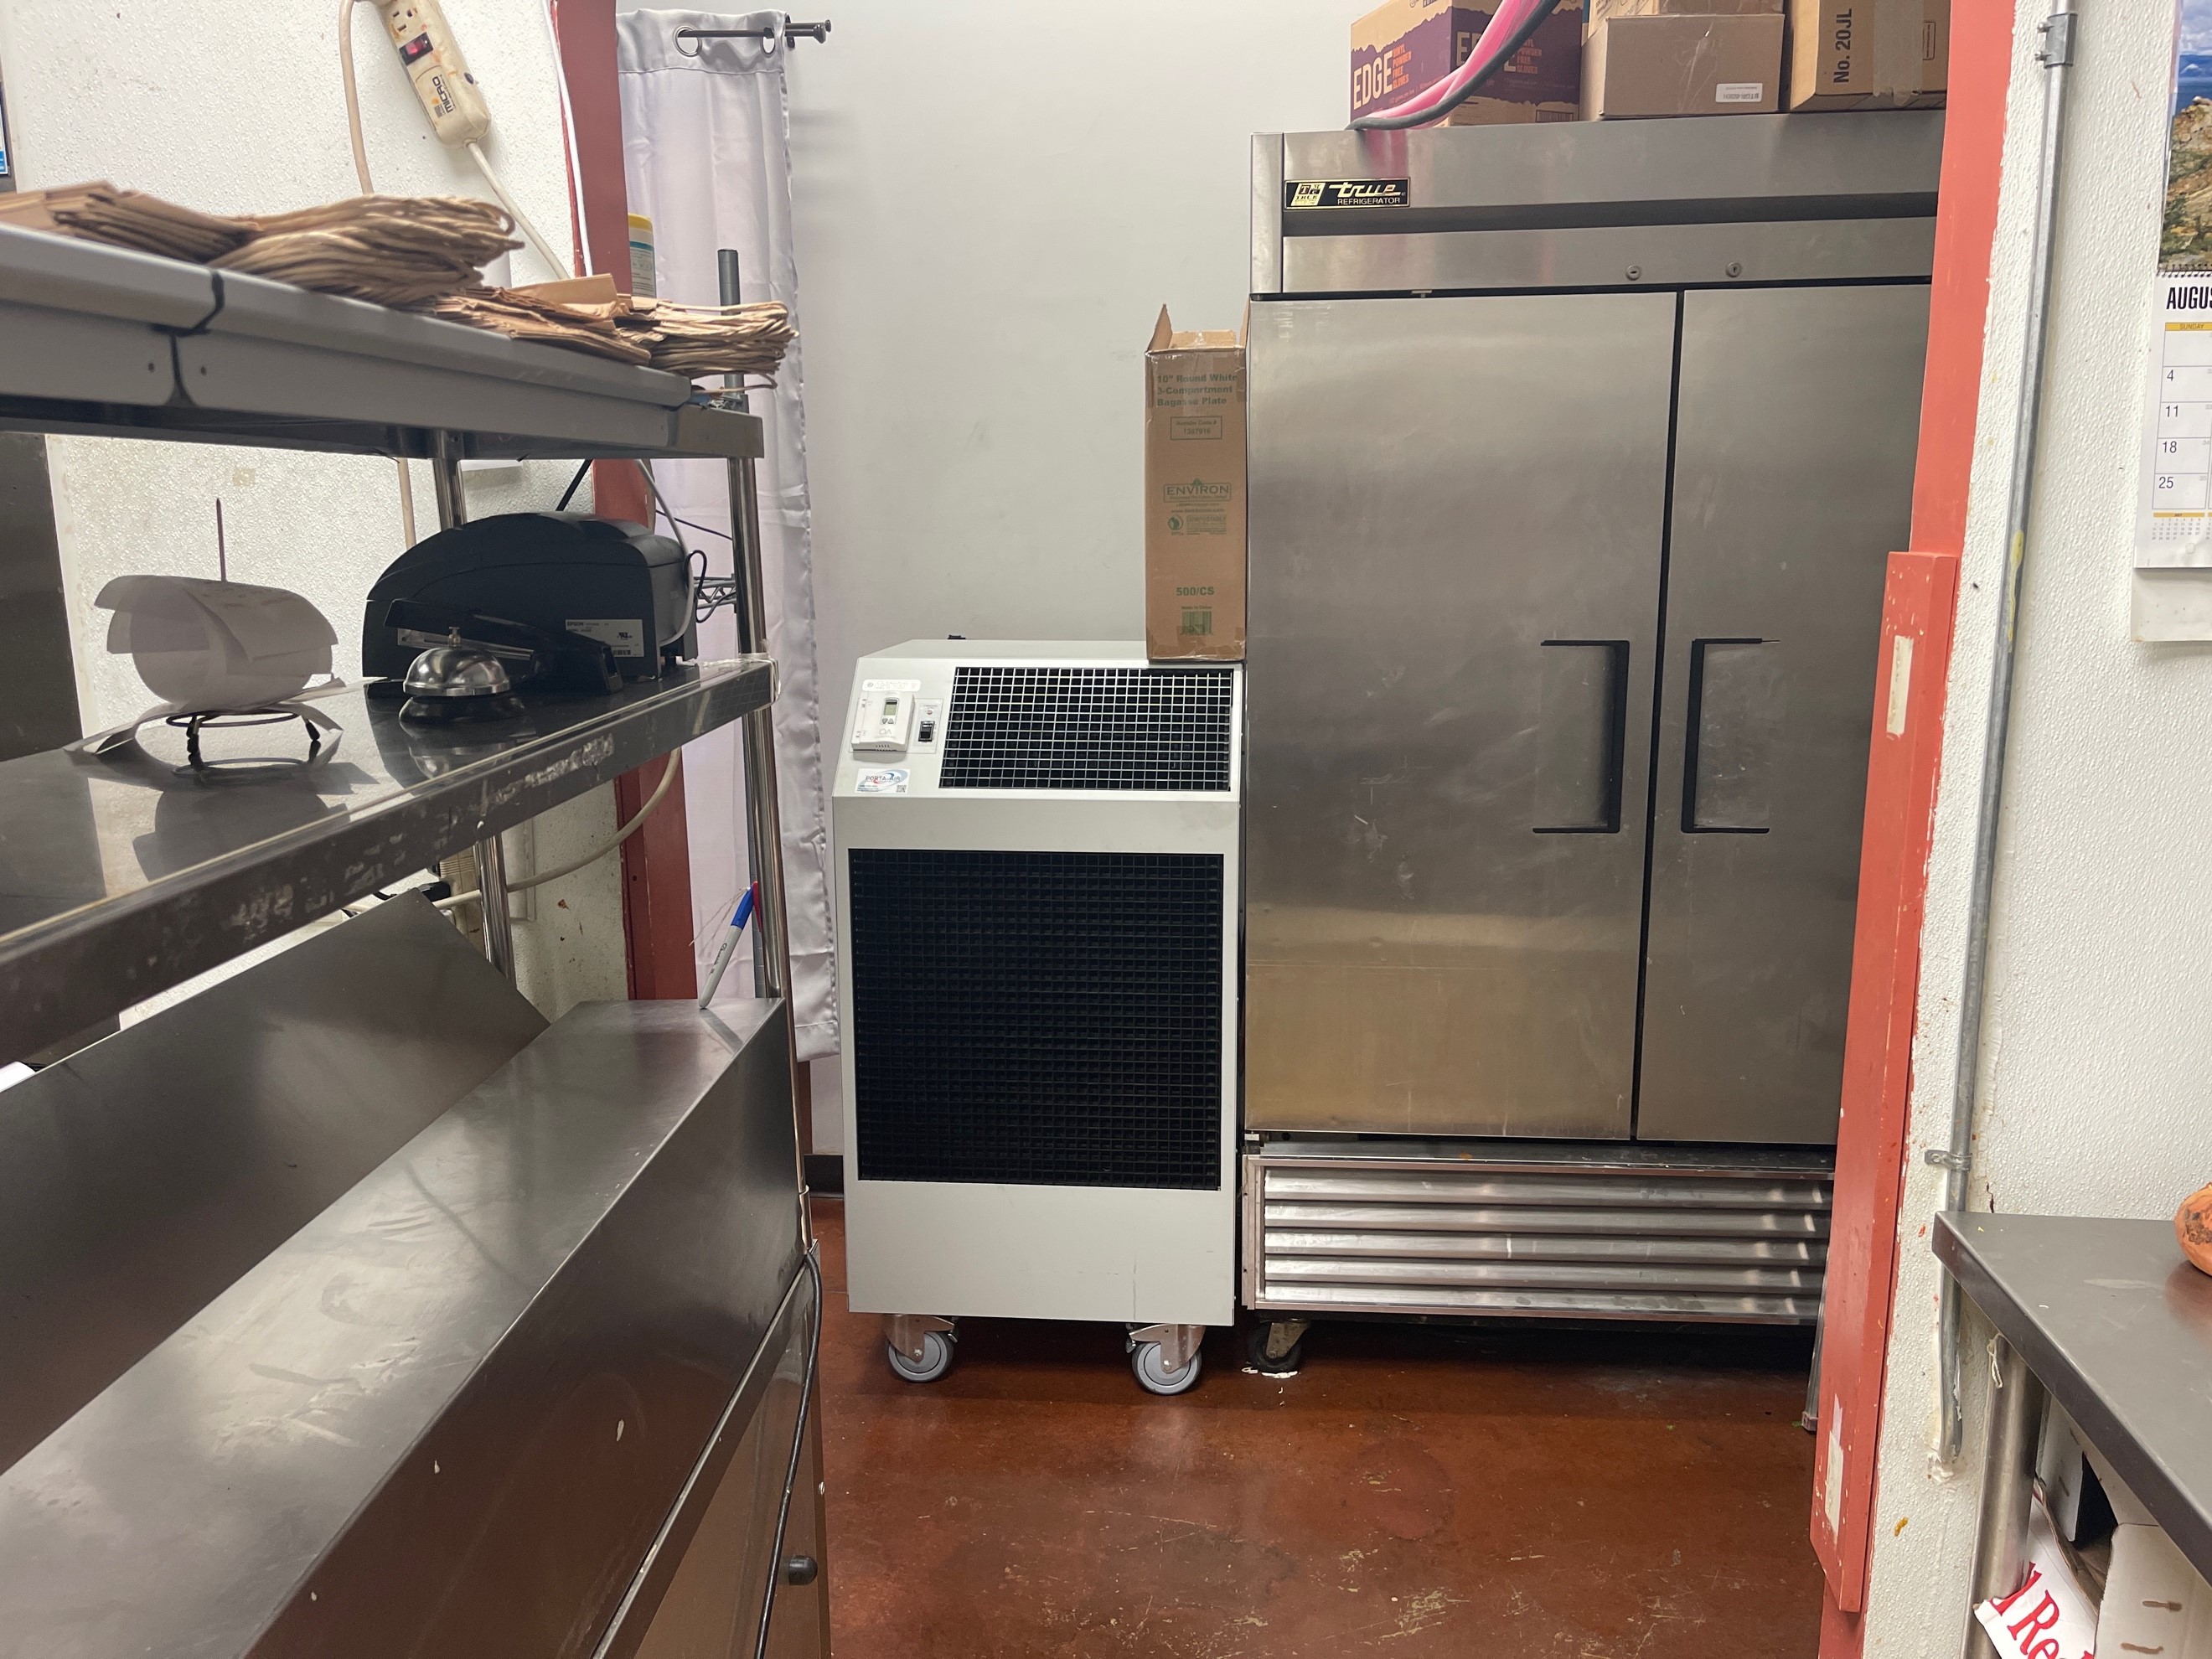 Portable Air equipment installed in fast food restaurant kitchen with water hoses routed overhead.  